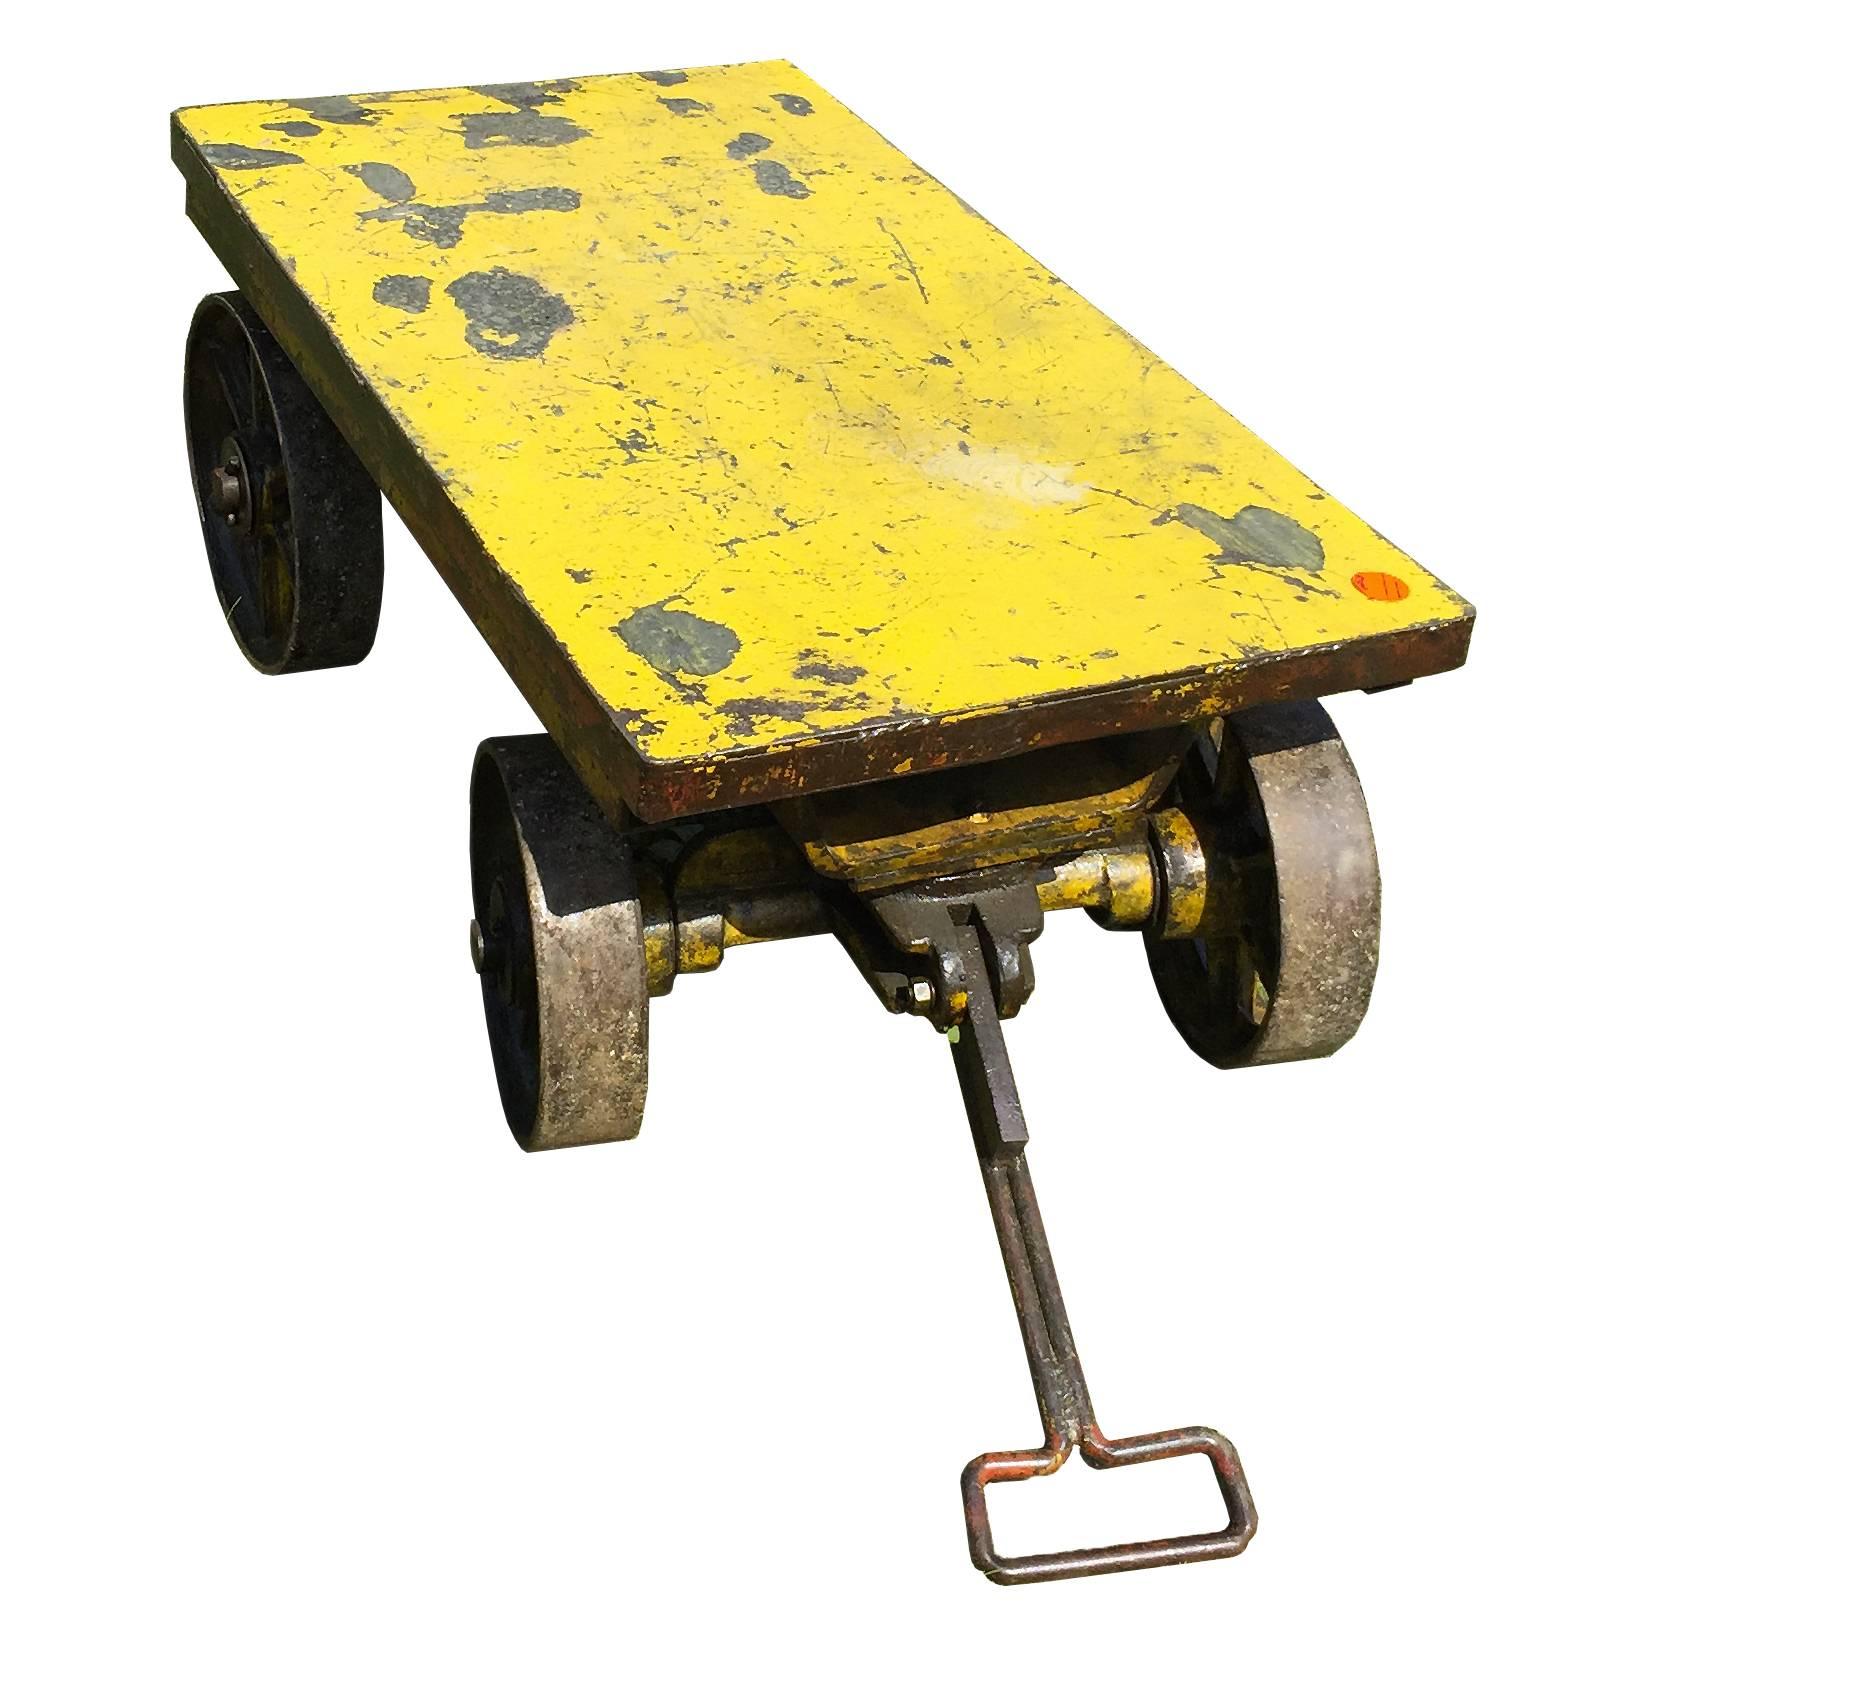 Iron and cast iron Industrial wheelbarrow, rectangular shape, with 4 big wheels (11” diameter) and a long handle that allows the front wheels to rotate, North America, 1900. The top shelf has a thickness of 4 inches.